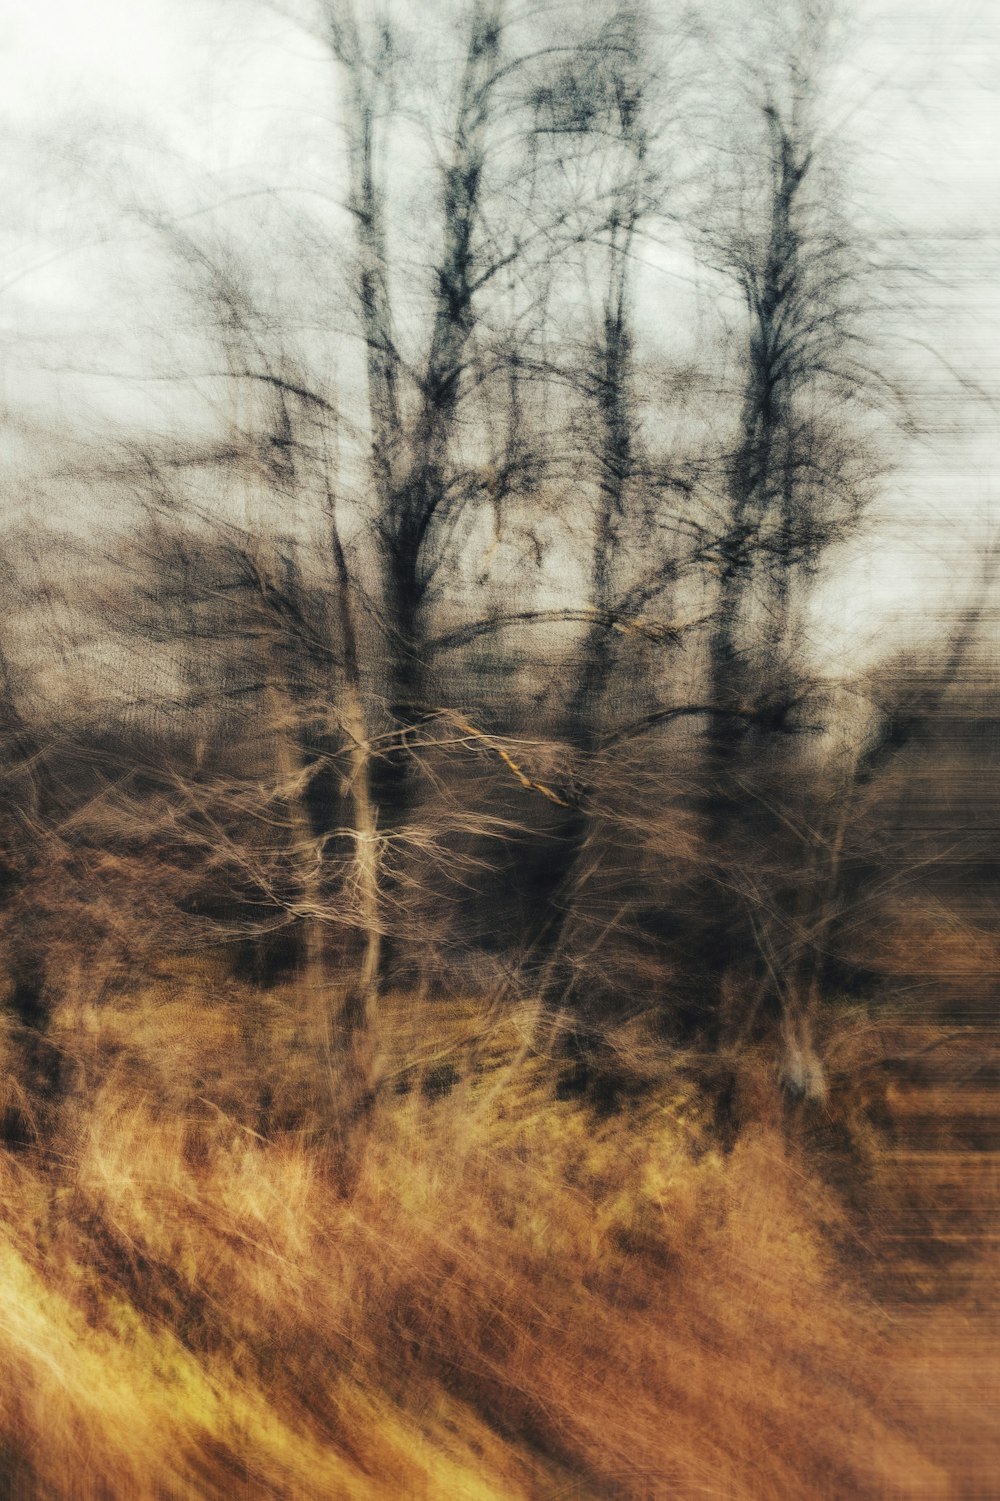 a blurry photo of trees in a field